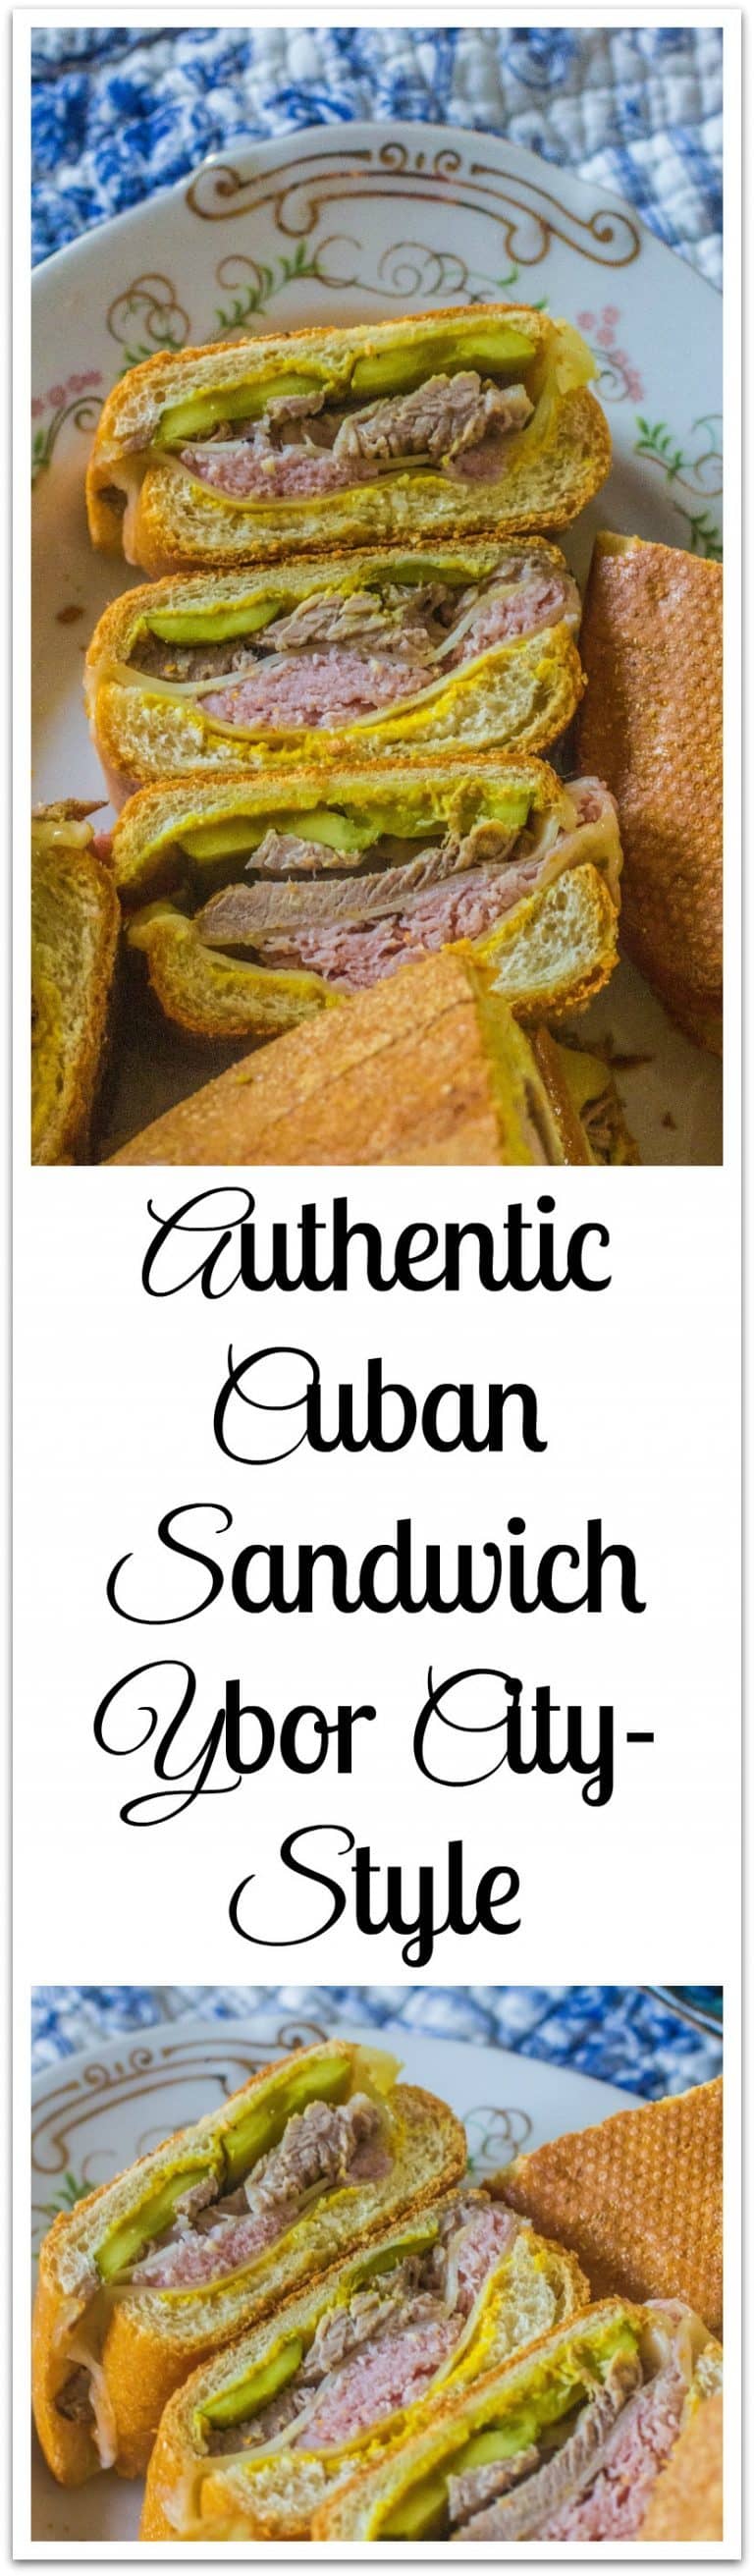 Authentic Cuban Sandwich Ybor CityStyle Syrup and Biscuits